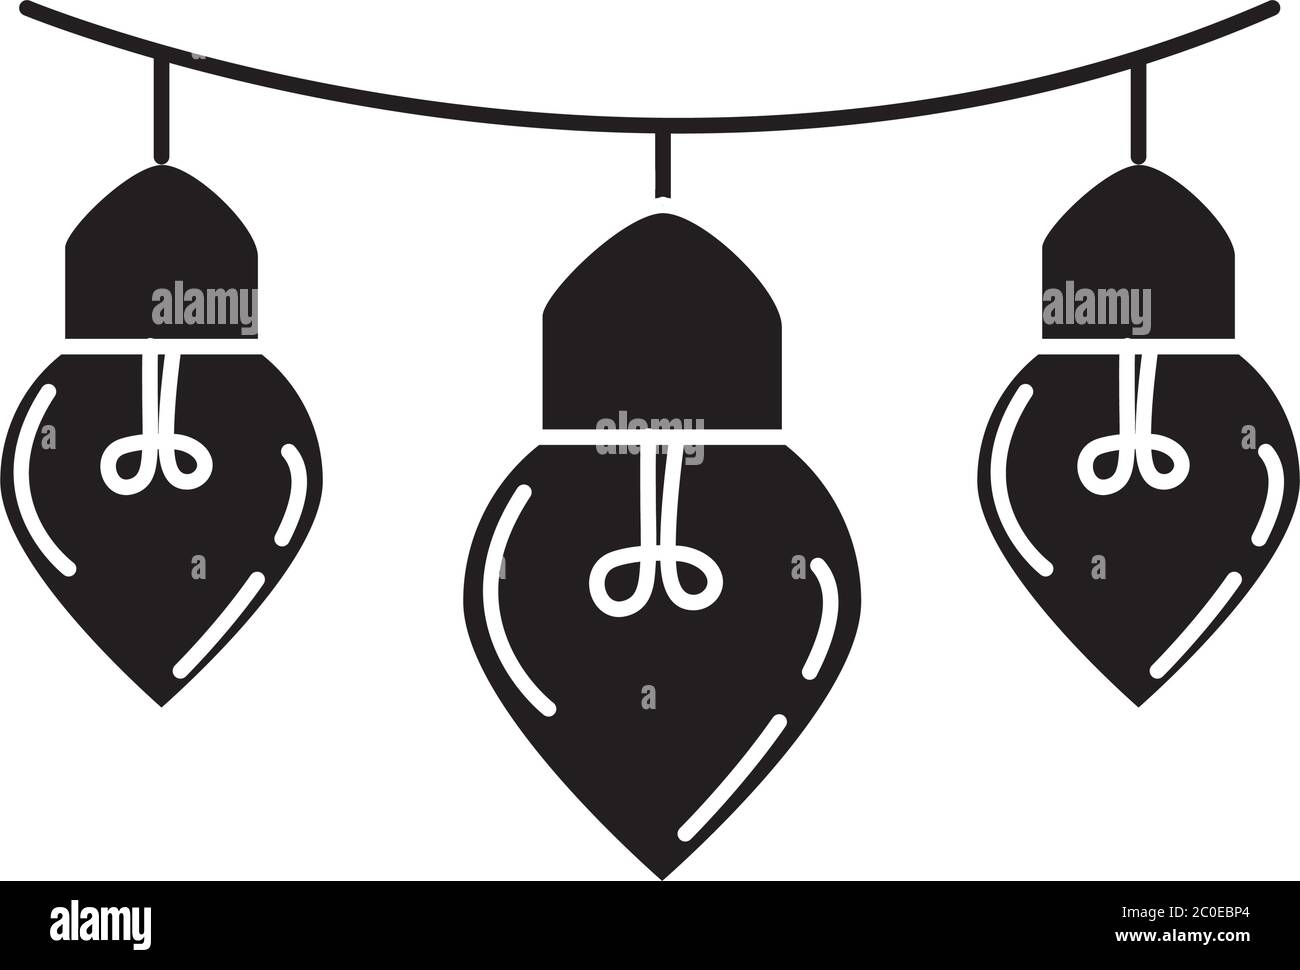 hanging lamps, electric light bulb, eco idea metaphor, isolated icon silhouette style vector illustration Stock Vector